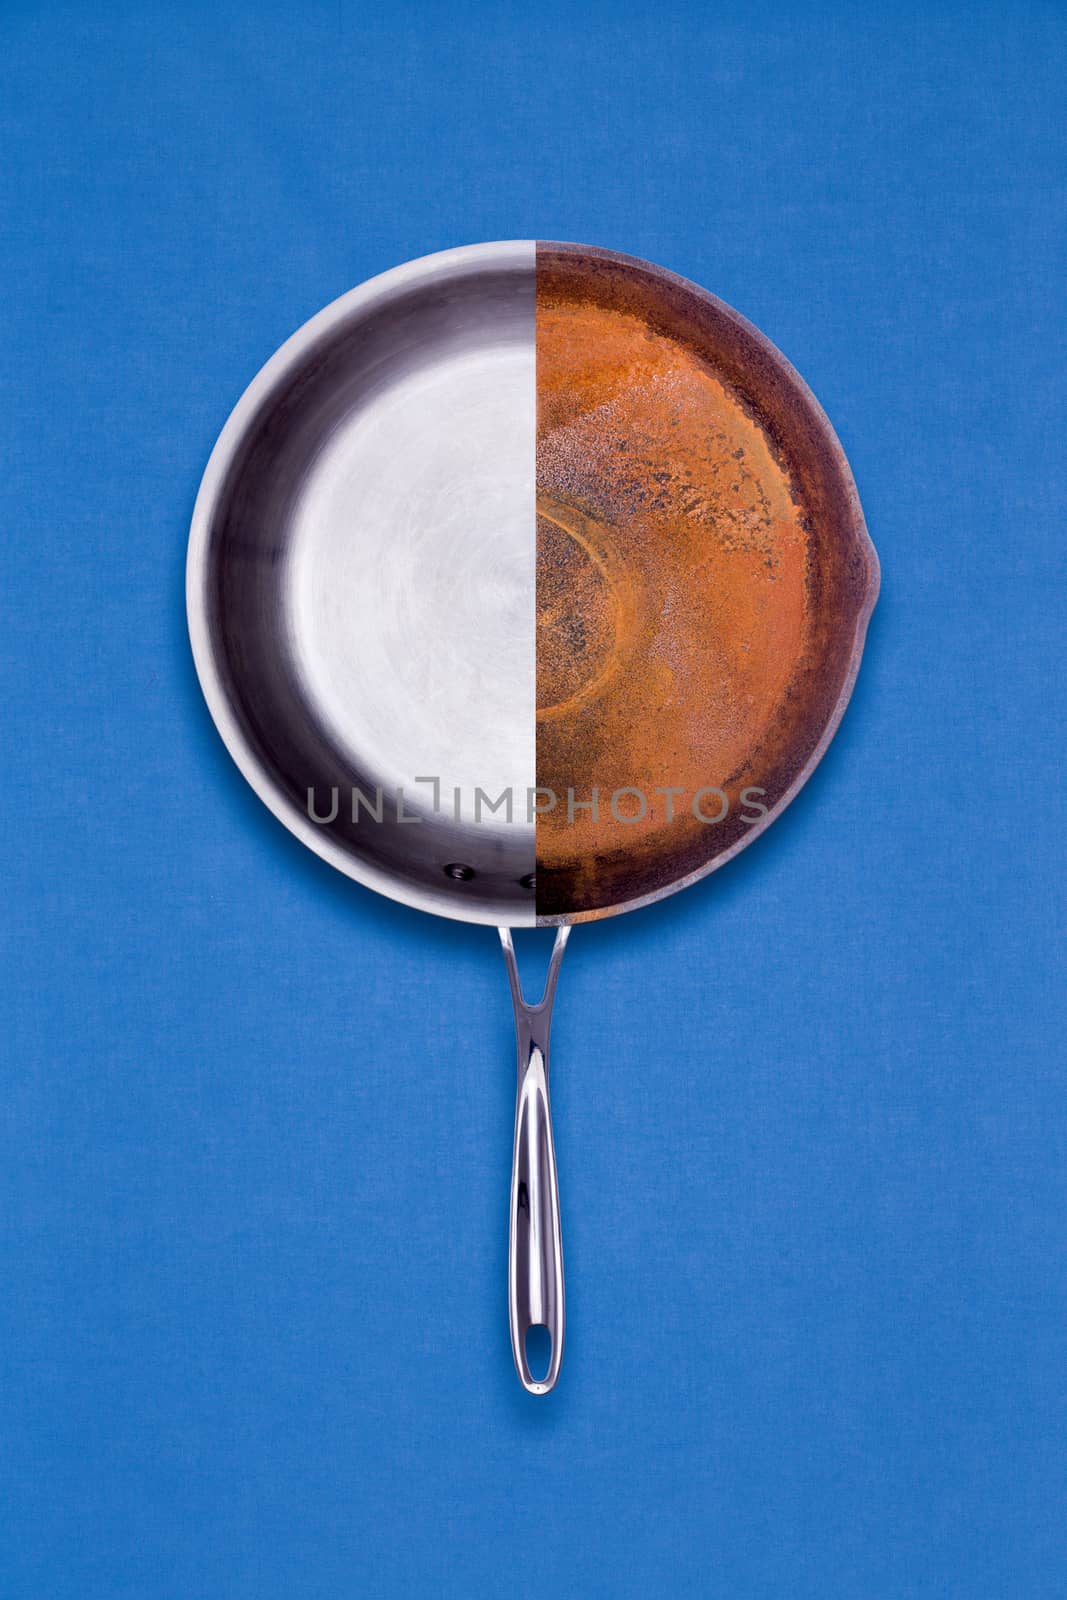 New teflon coated non-stick and old rusted frying pan combined into one halved unit for comparison of age and condition in a conceptual overhead view on a blue background